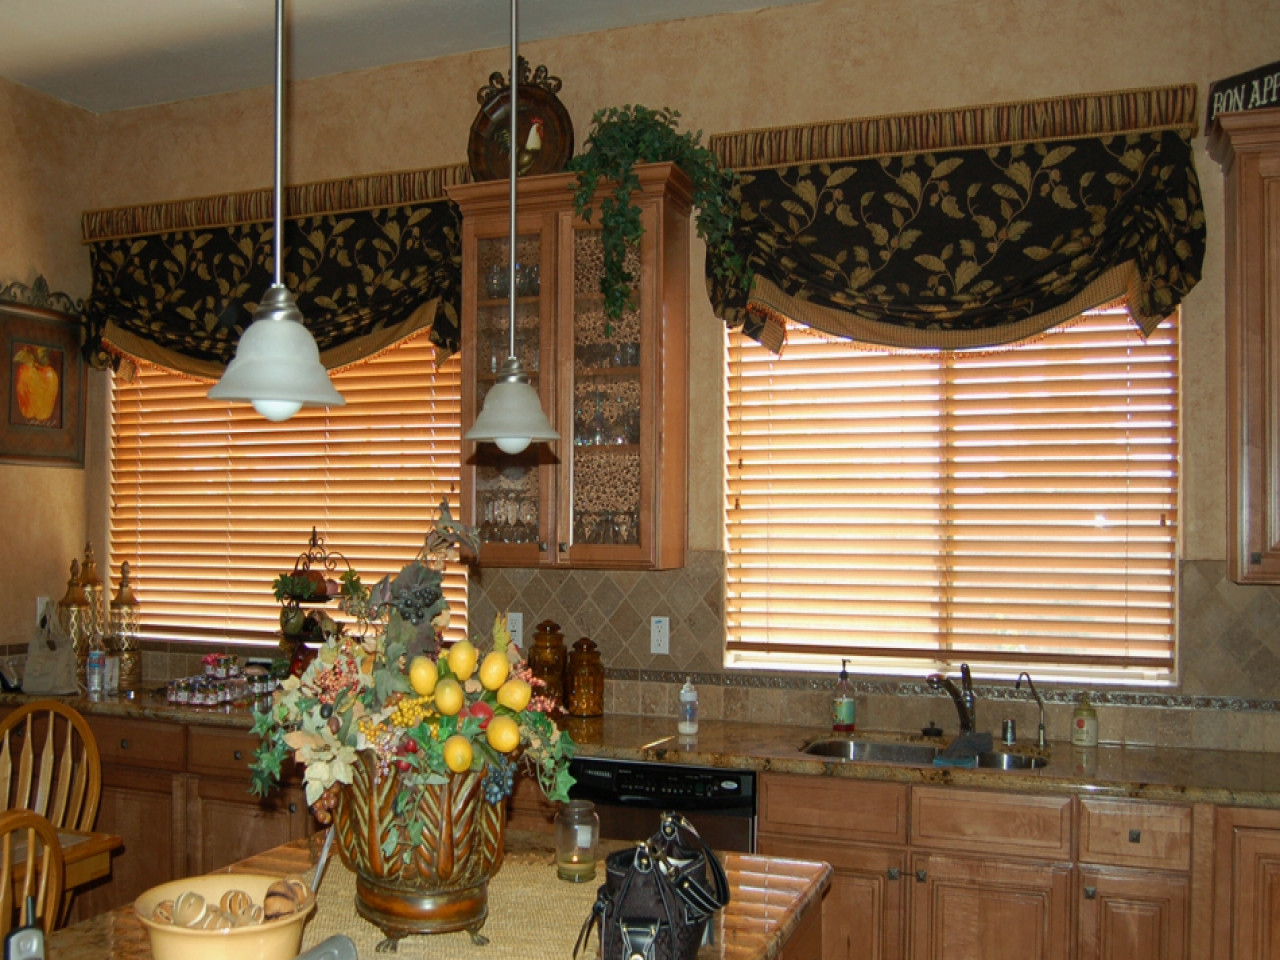 Tuscany Kitchen Curtains
 Dining room draperies tuscan kitchen curtains valances